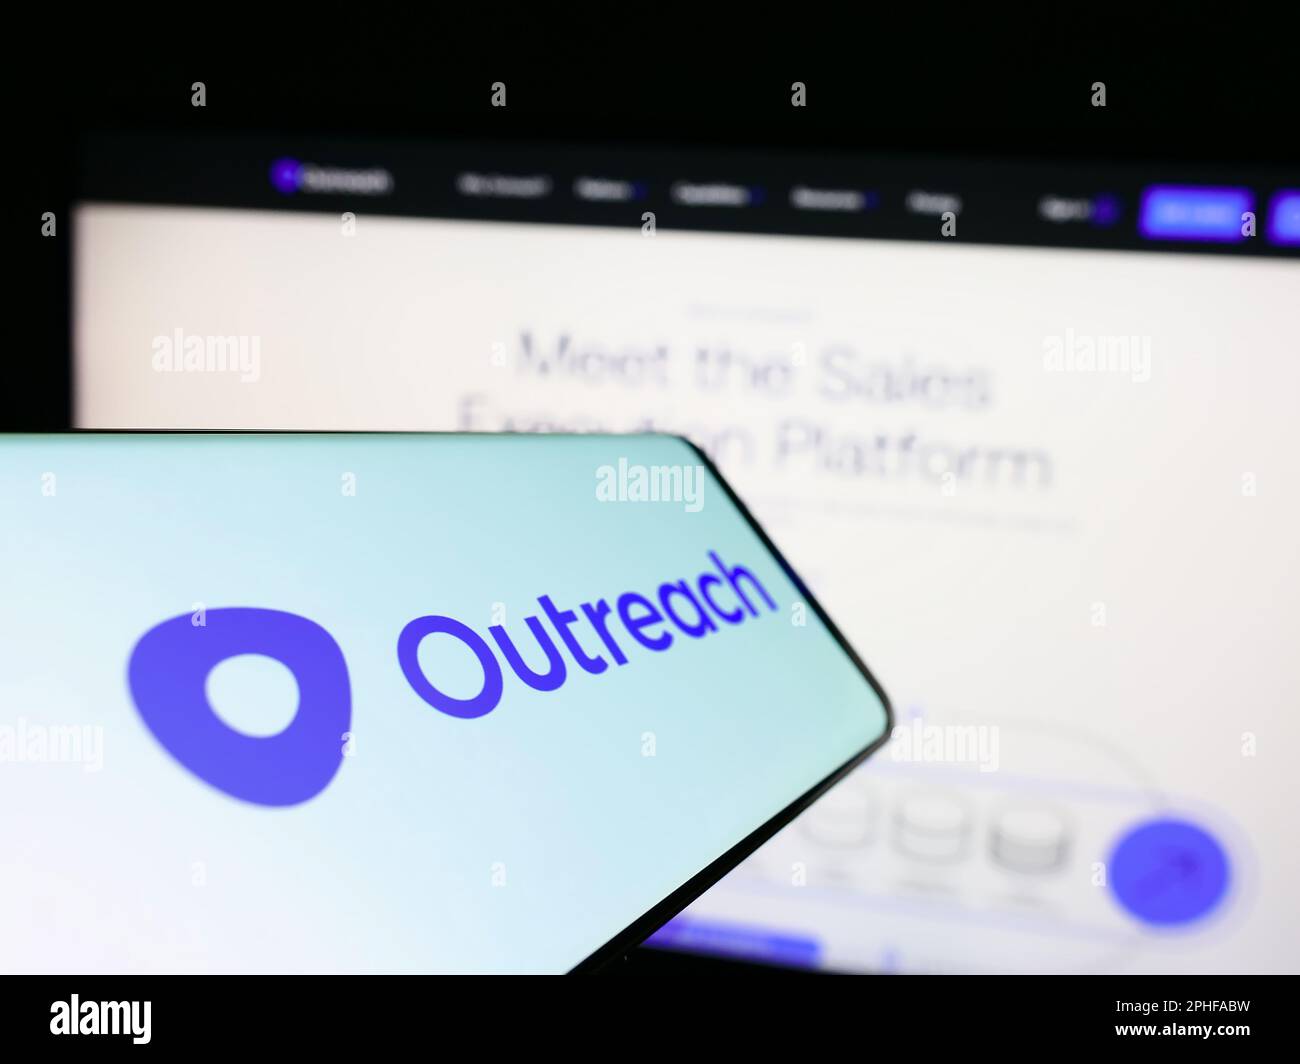 Mobile phone with logo of American sales software company Outreach.io on screen in front of business website. Focus on center of phone display. Stock Photo